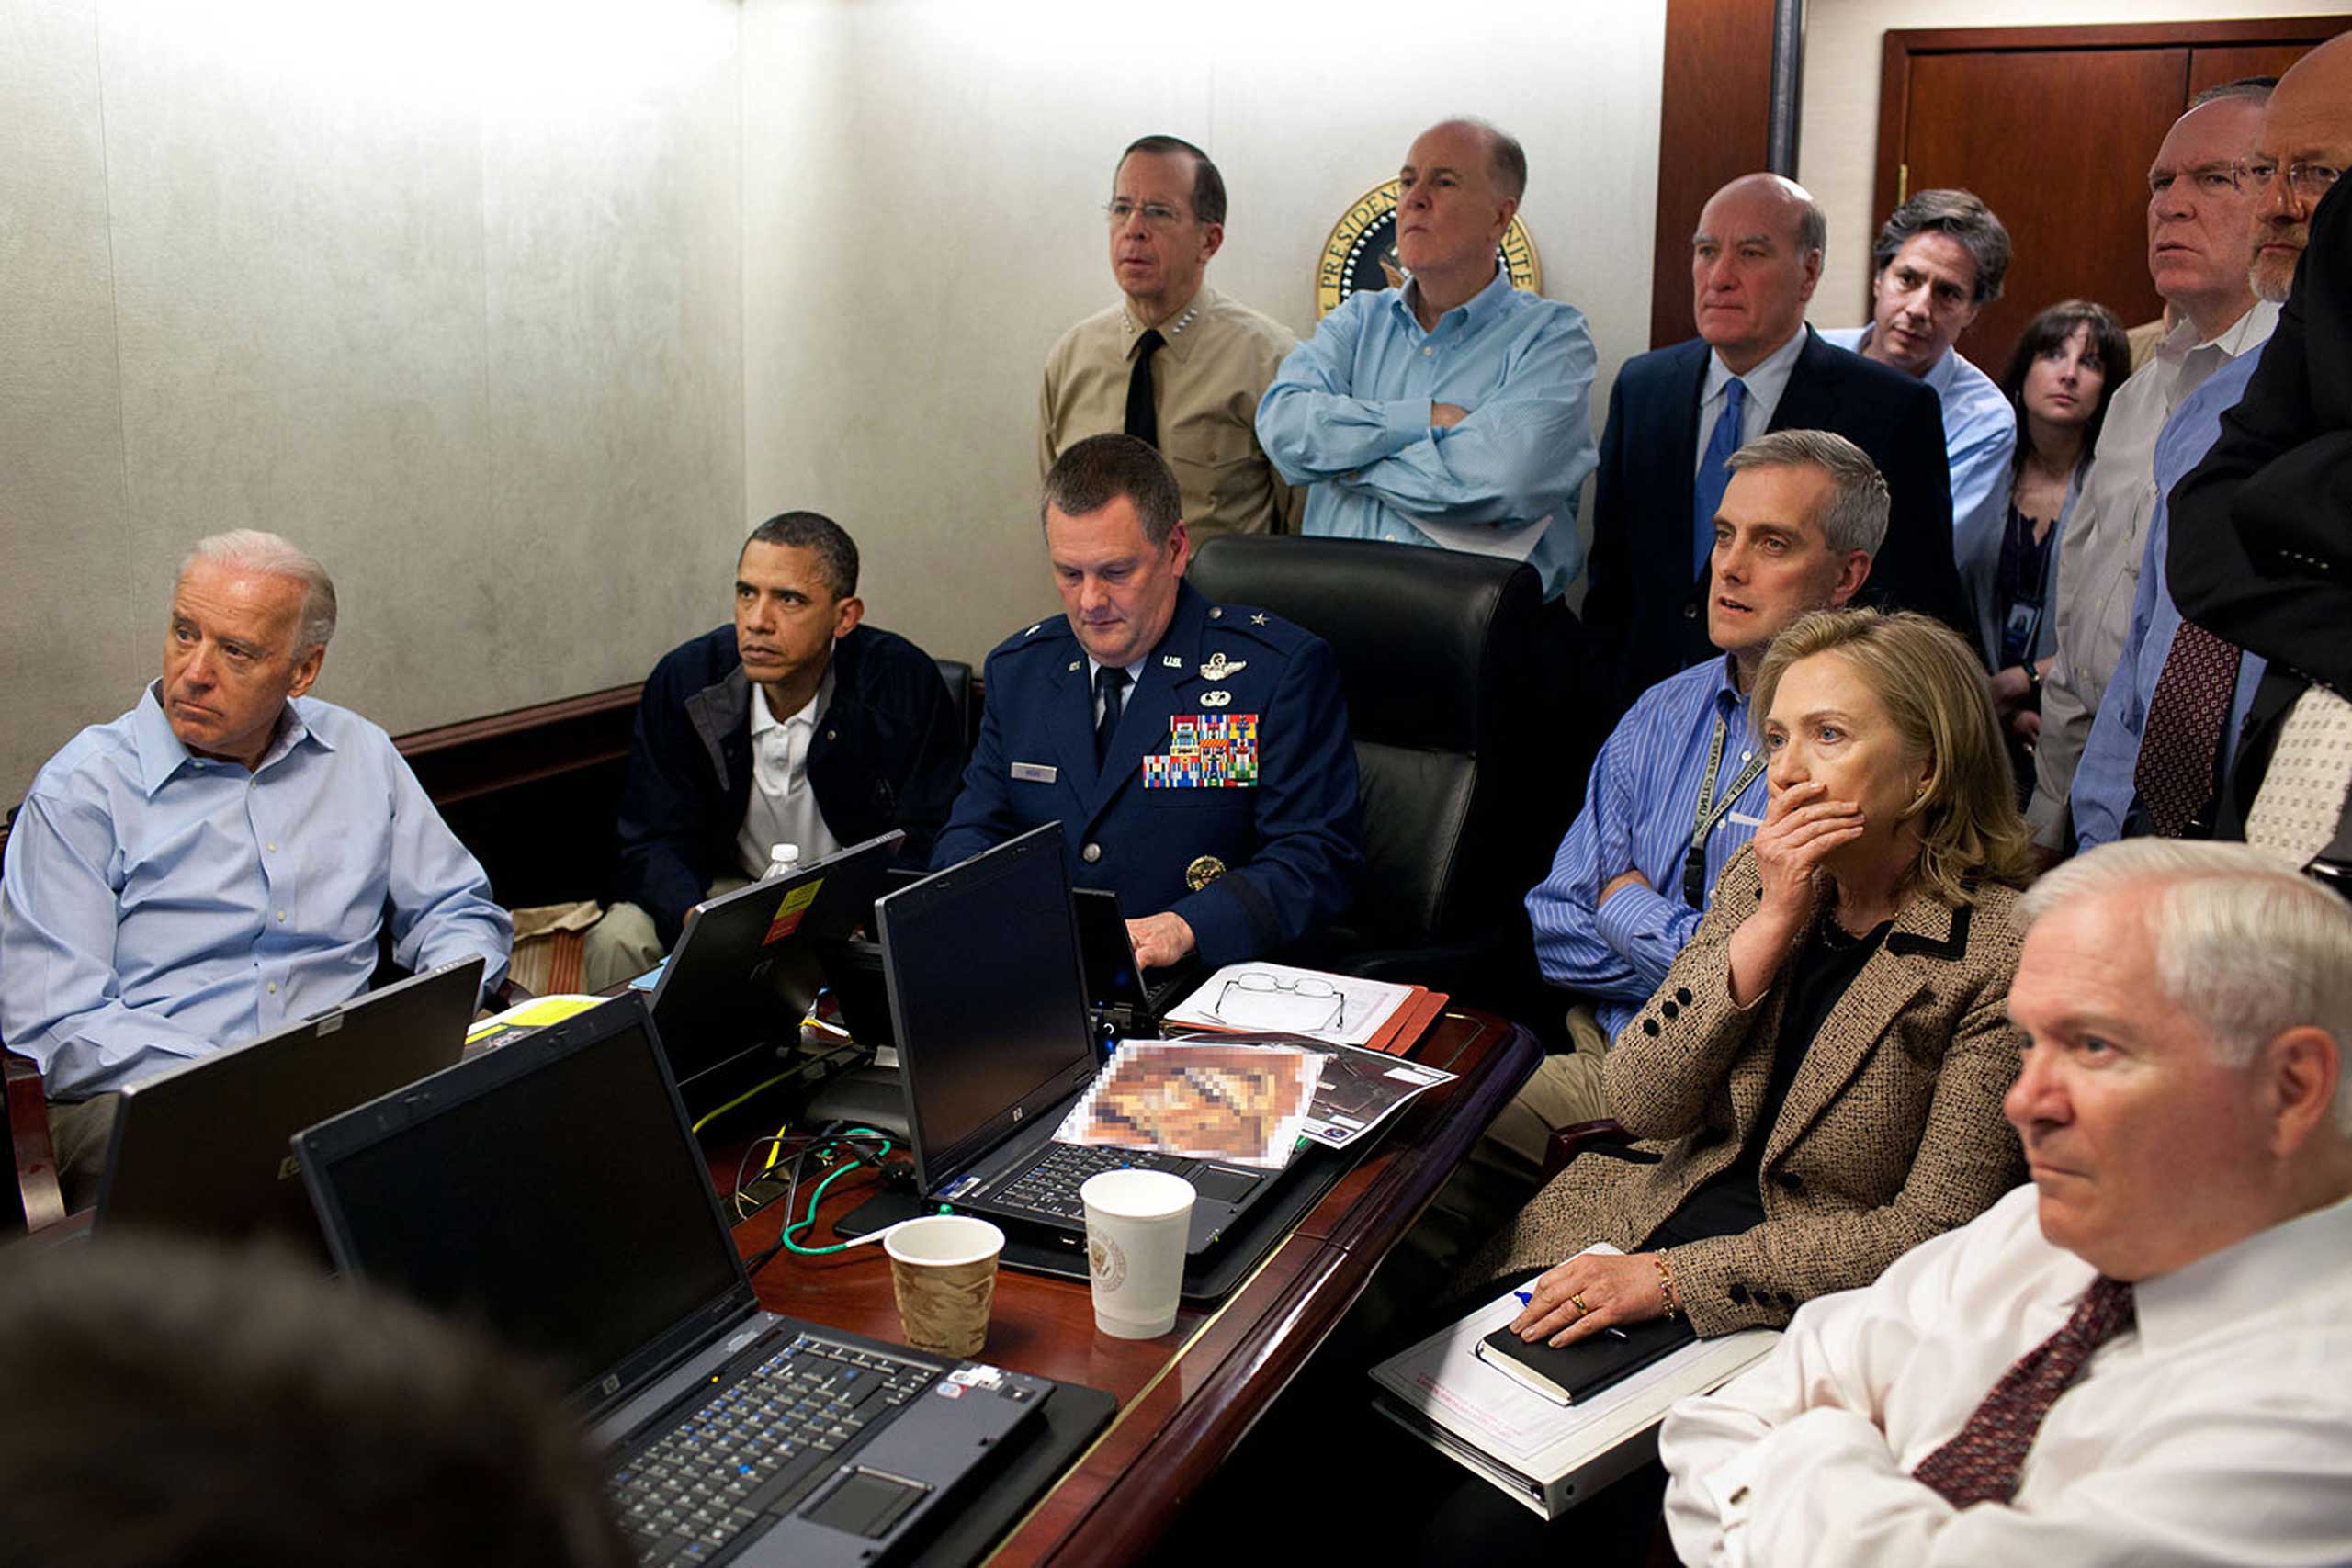 Much has been made of this photograph that shows the President and Vice President and the national security team monitoring in real time the mission against Osama bin Laden, May 1, 2011. Some more background on the photograph: The White House Situation Room is actually comprised of several different conference rooms. The majority of the time, the President convenes meetings in the large conference room with assigned seats. But to monitor this mission, the group moved into the much smaller conference room. The President chose to sit next to Brigadier General Marshall B.  Brad  Webb, Assistant Commanding General of Joint Special Operations Command, who was point man for the communications taking place. With so few chairs, others just stood at the back of the room. I was jammed into a corner of the room with no room to move. During the mission itself, I made approximately 100 photographs, almost all from this cramped spot in the corner. Please note: a classified document seen in front of Sec. Clinton has been obscured.